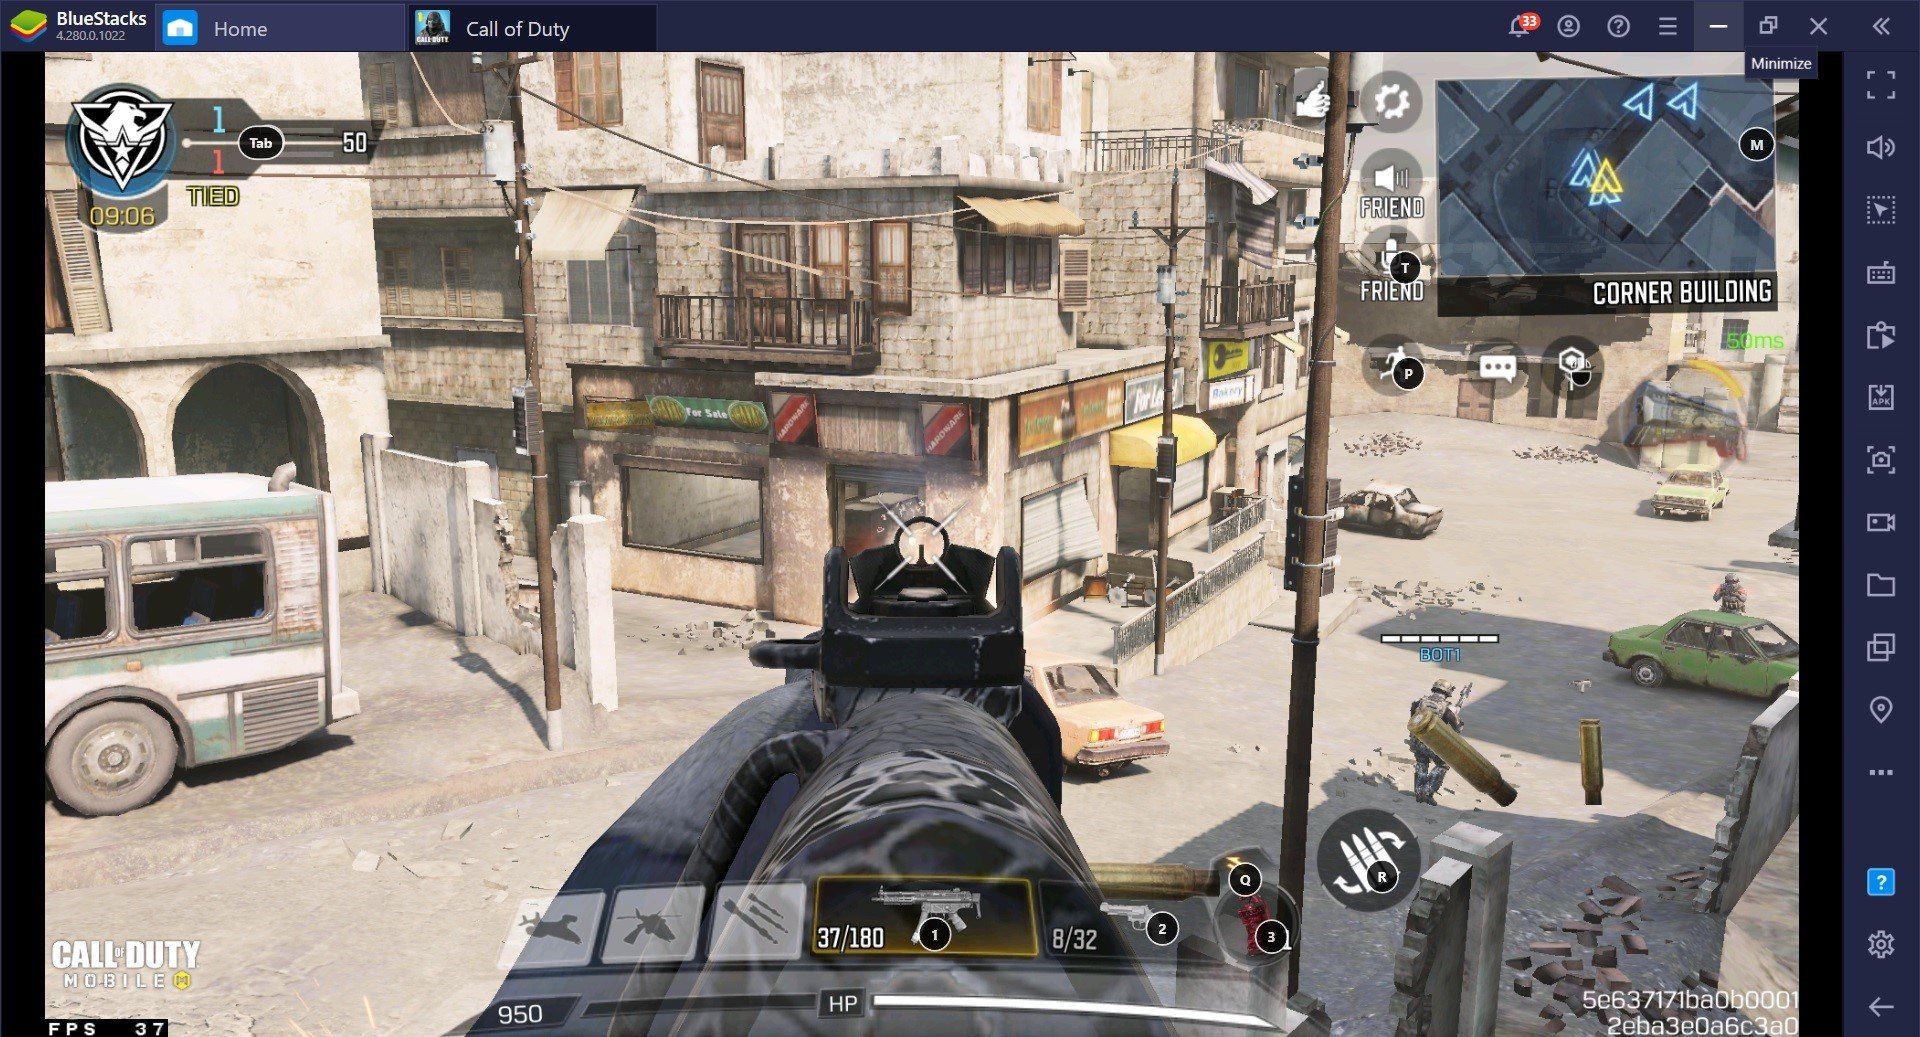 Call of Duty: Mobile QQ9 Weapon Guide - The SMG That Claps Too Hard